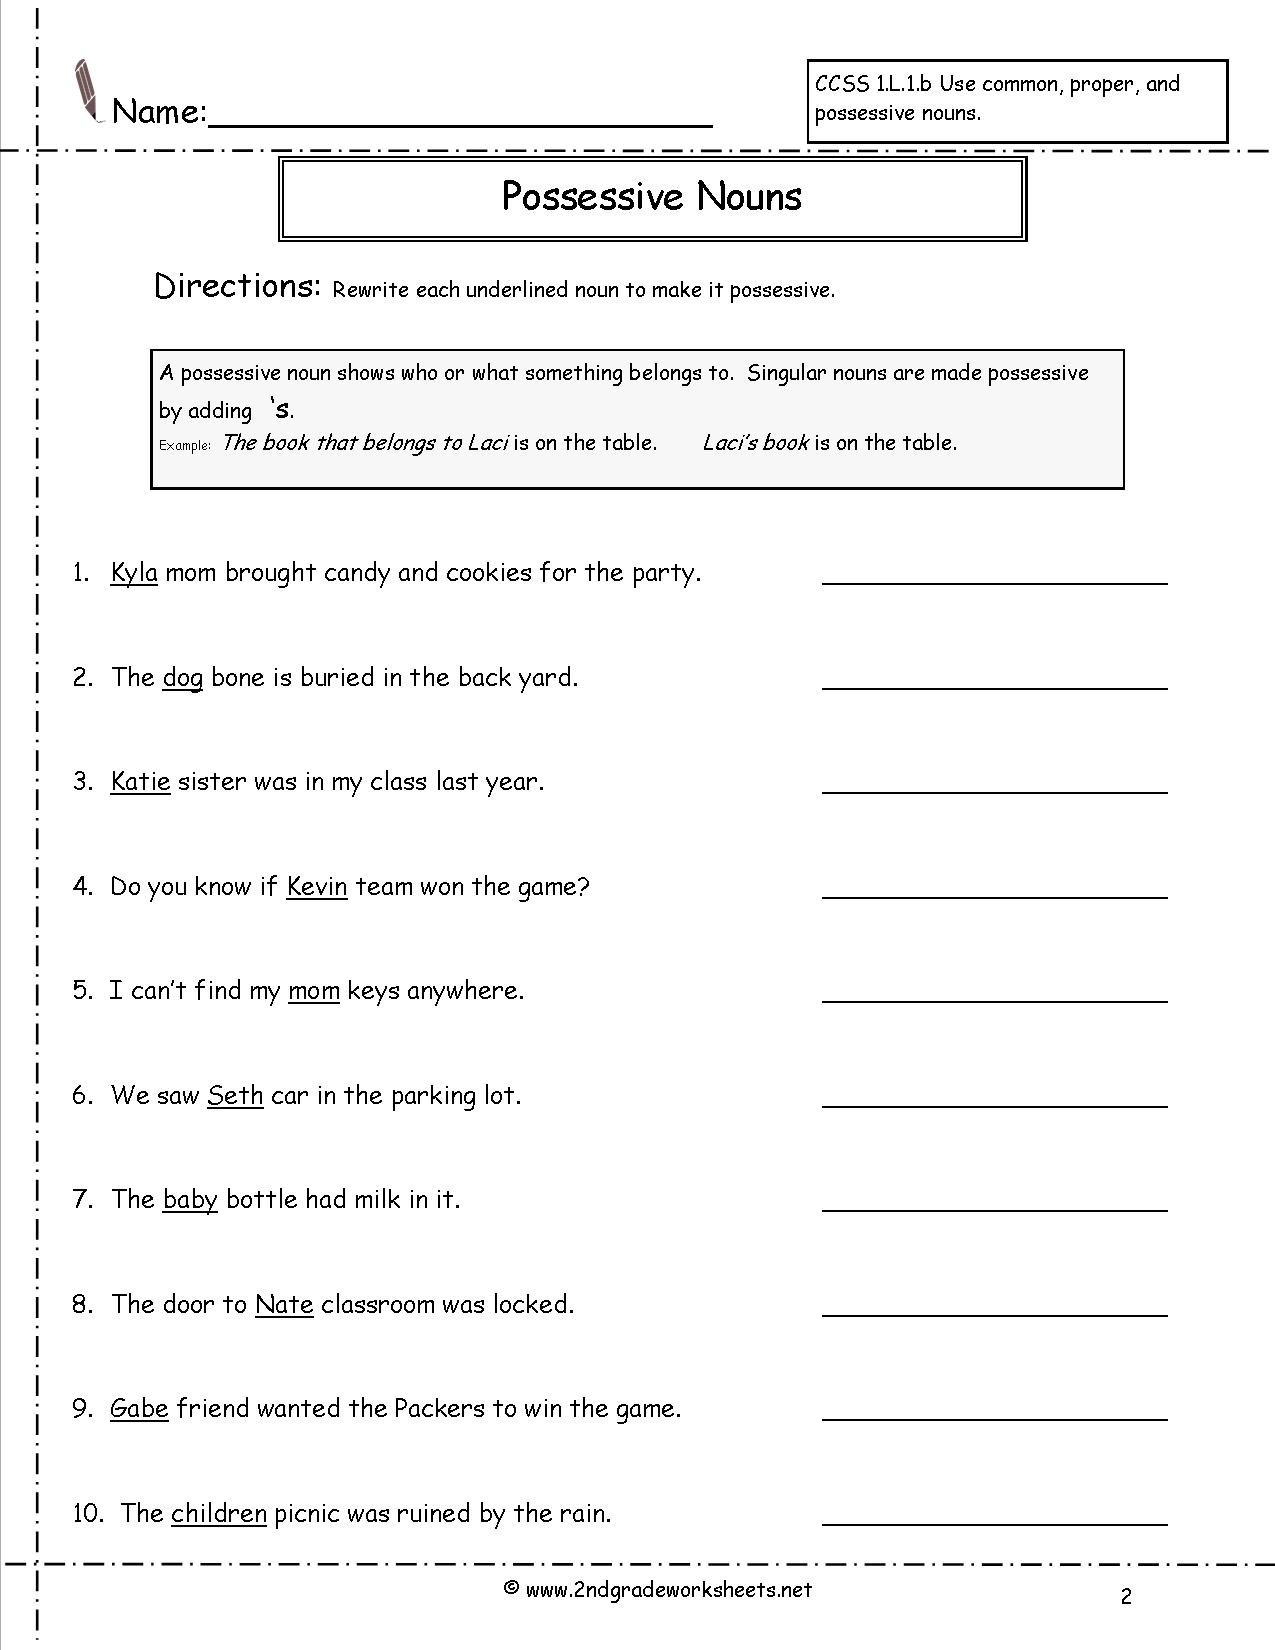 download-these-pronoun-worksheets-and-use-them-in-class-today-below